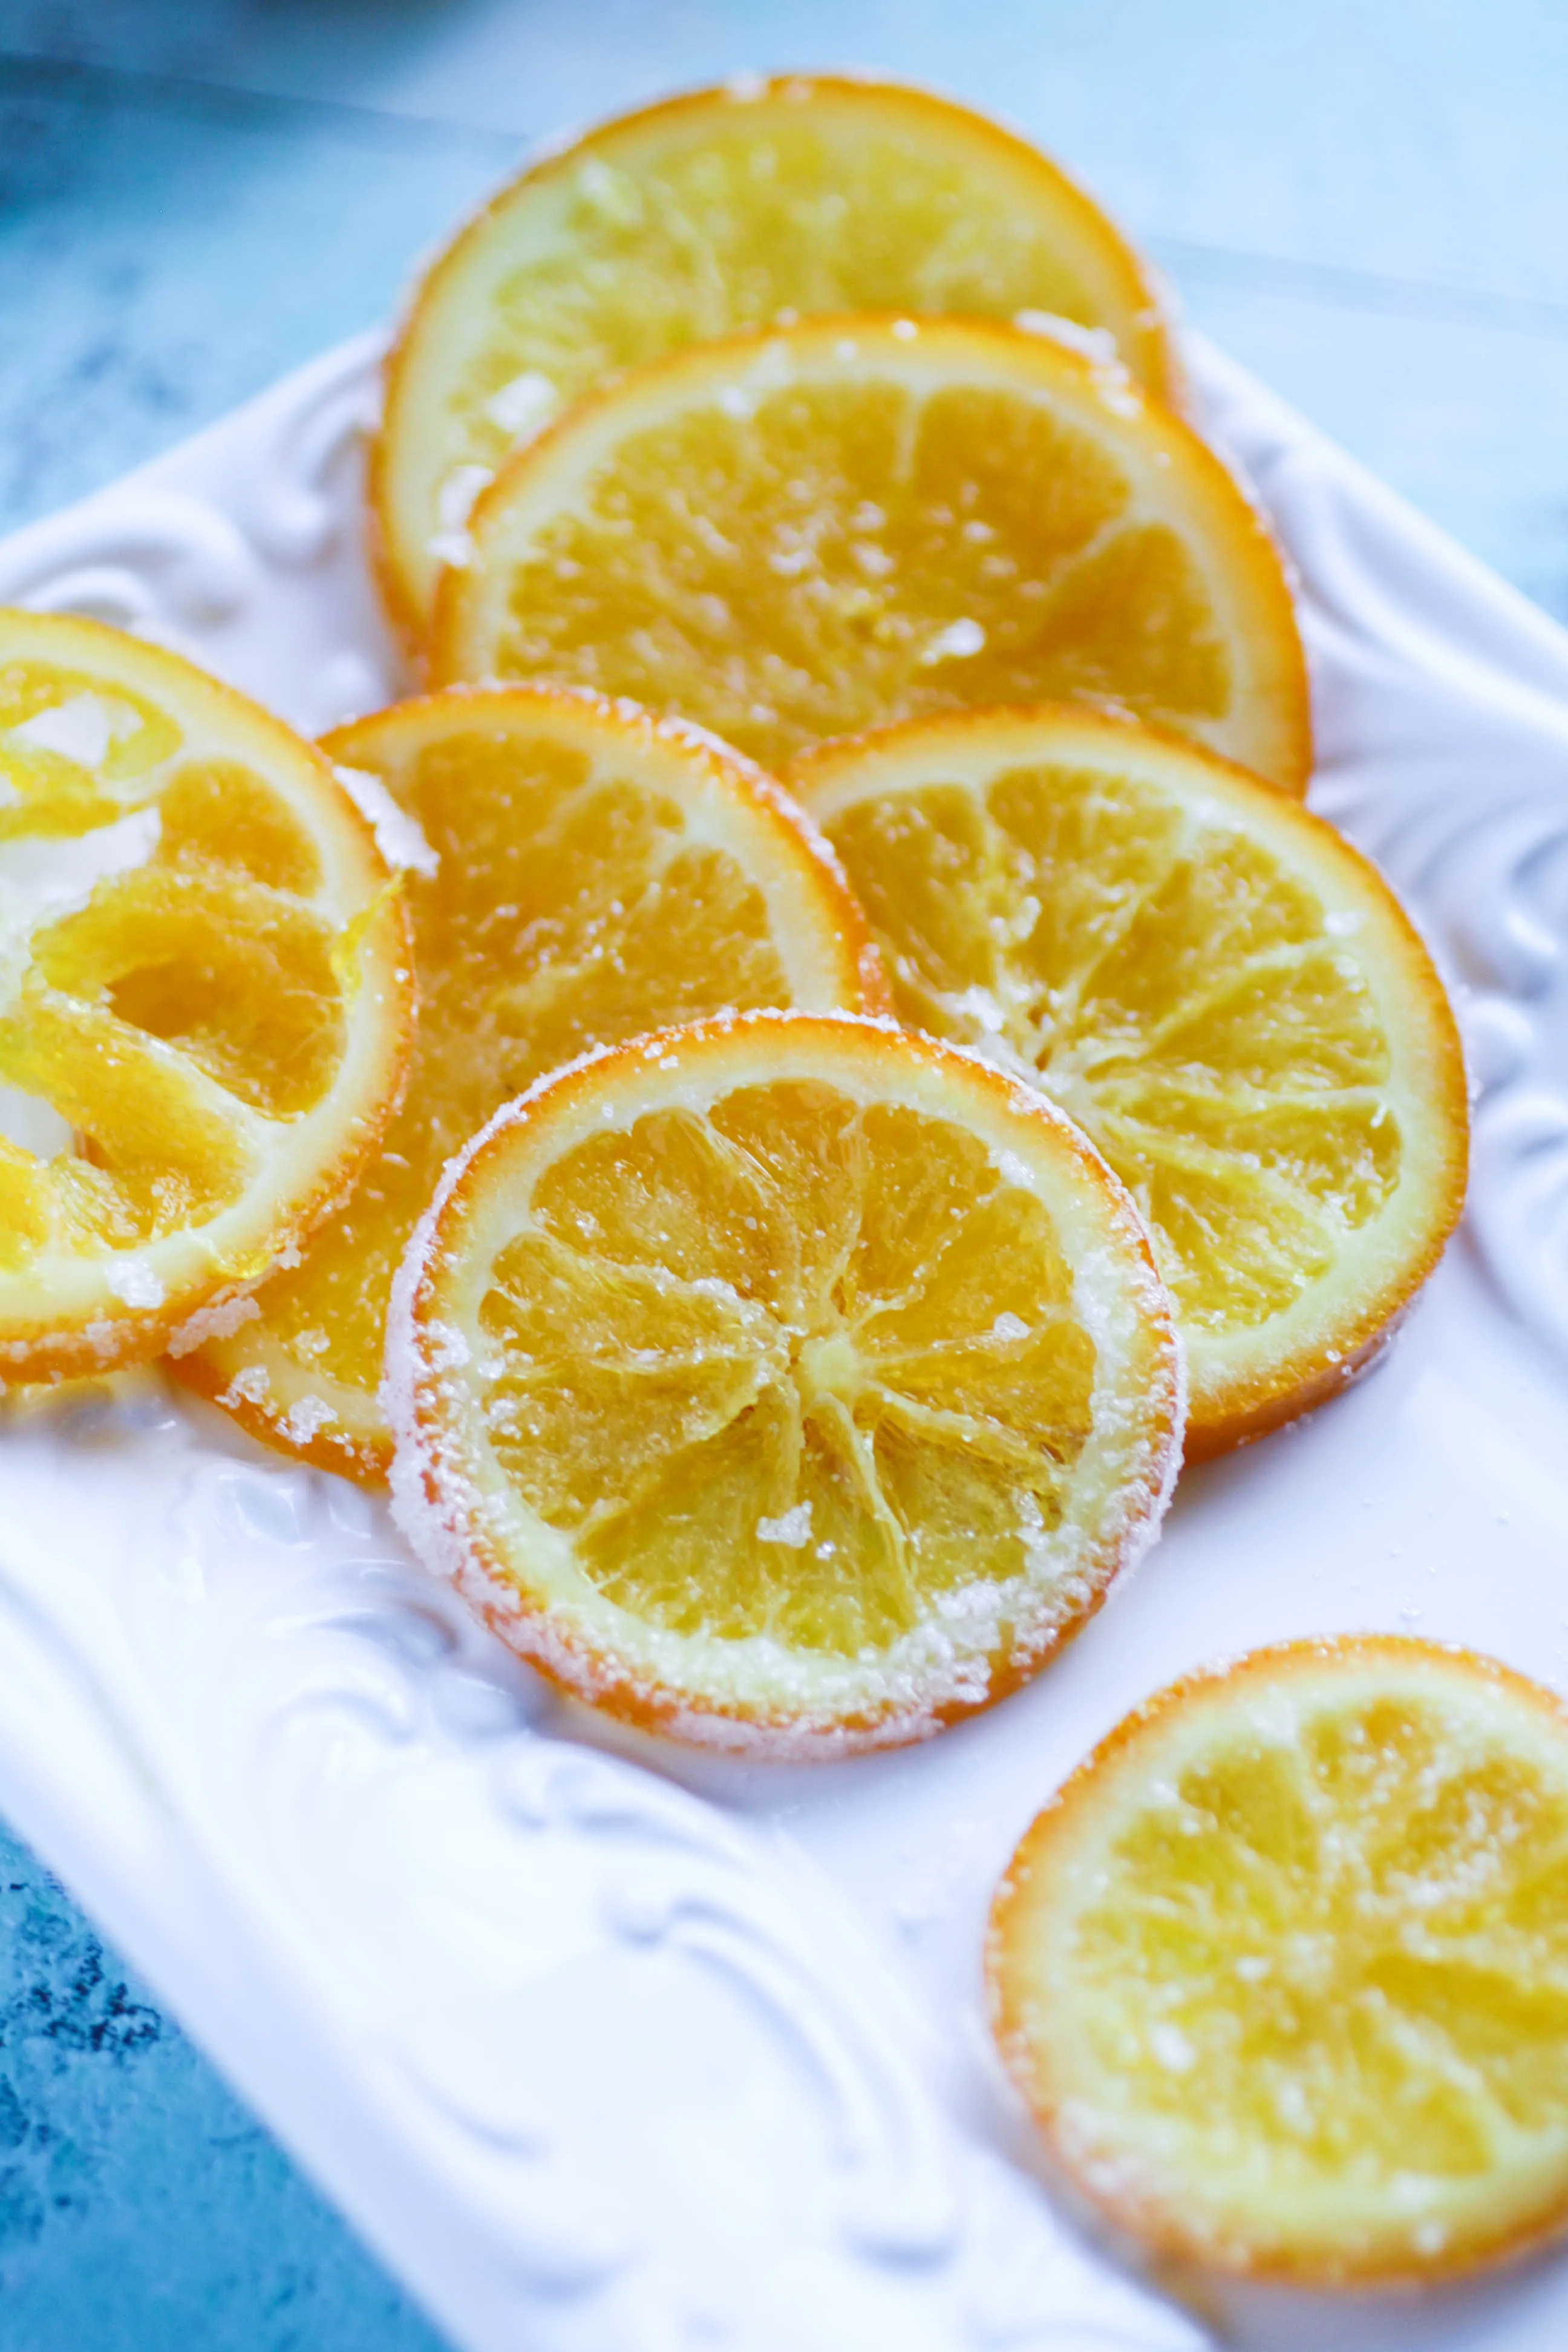 Candied Orange Slices are a lovely treat to brighten your day. Try these candied oranges to add brightness to your day!